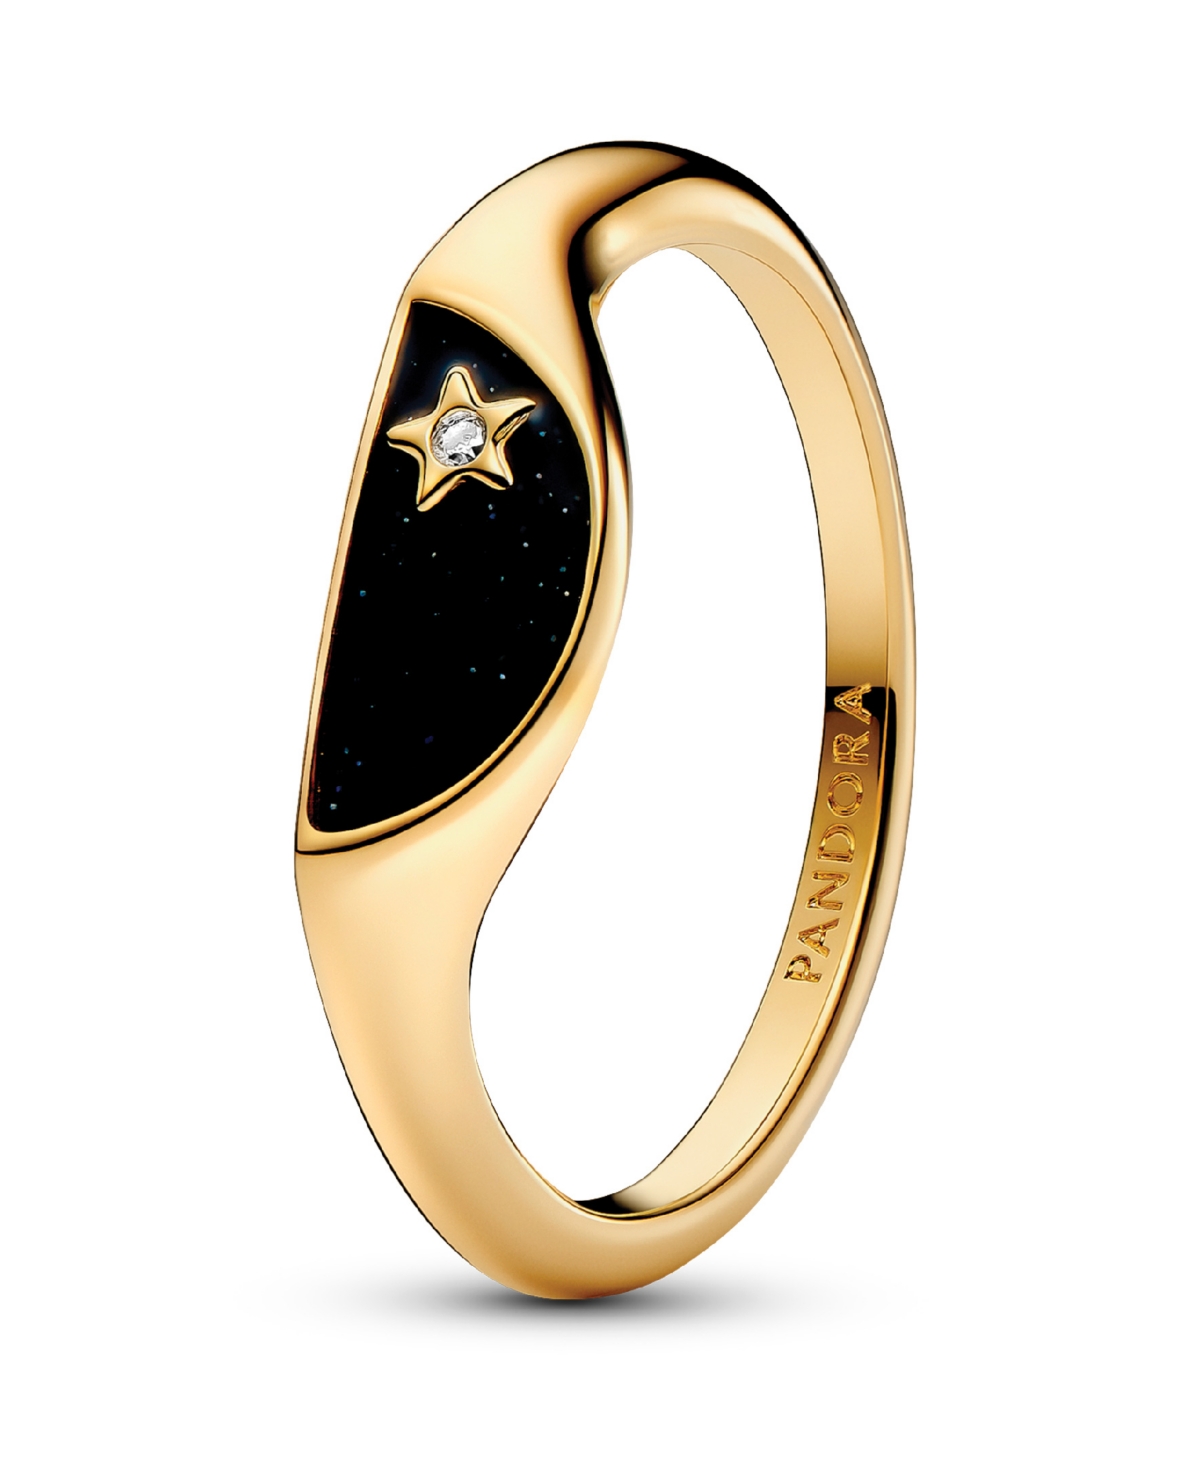 Halved Enamel Signet with Clear Cubic Zirconia Stones Ring - Gold